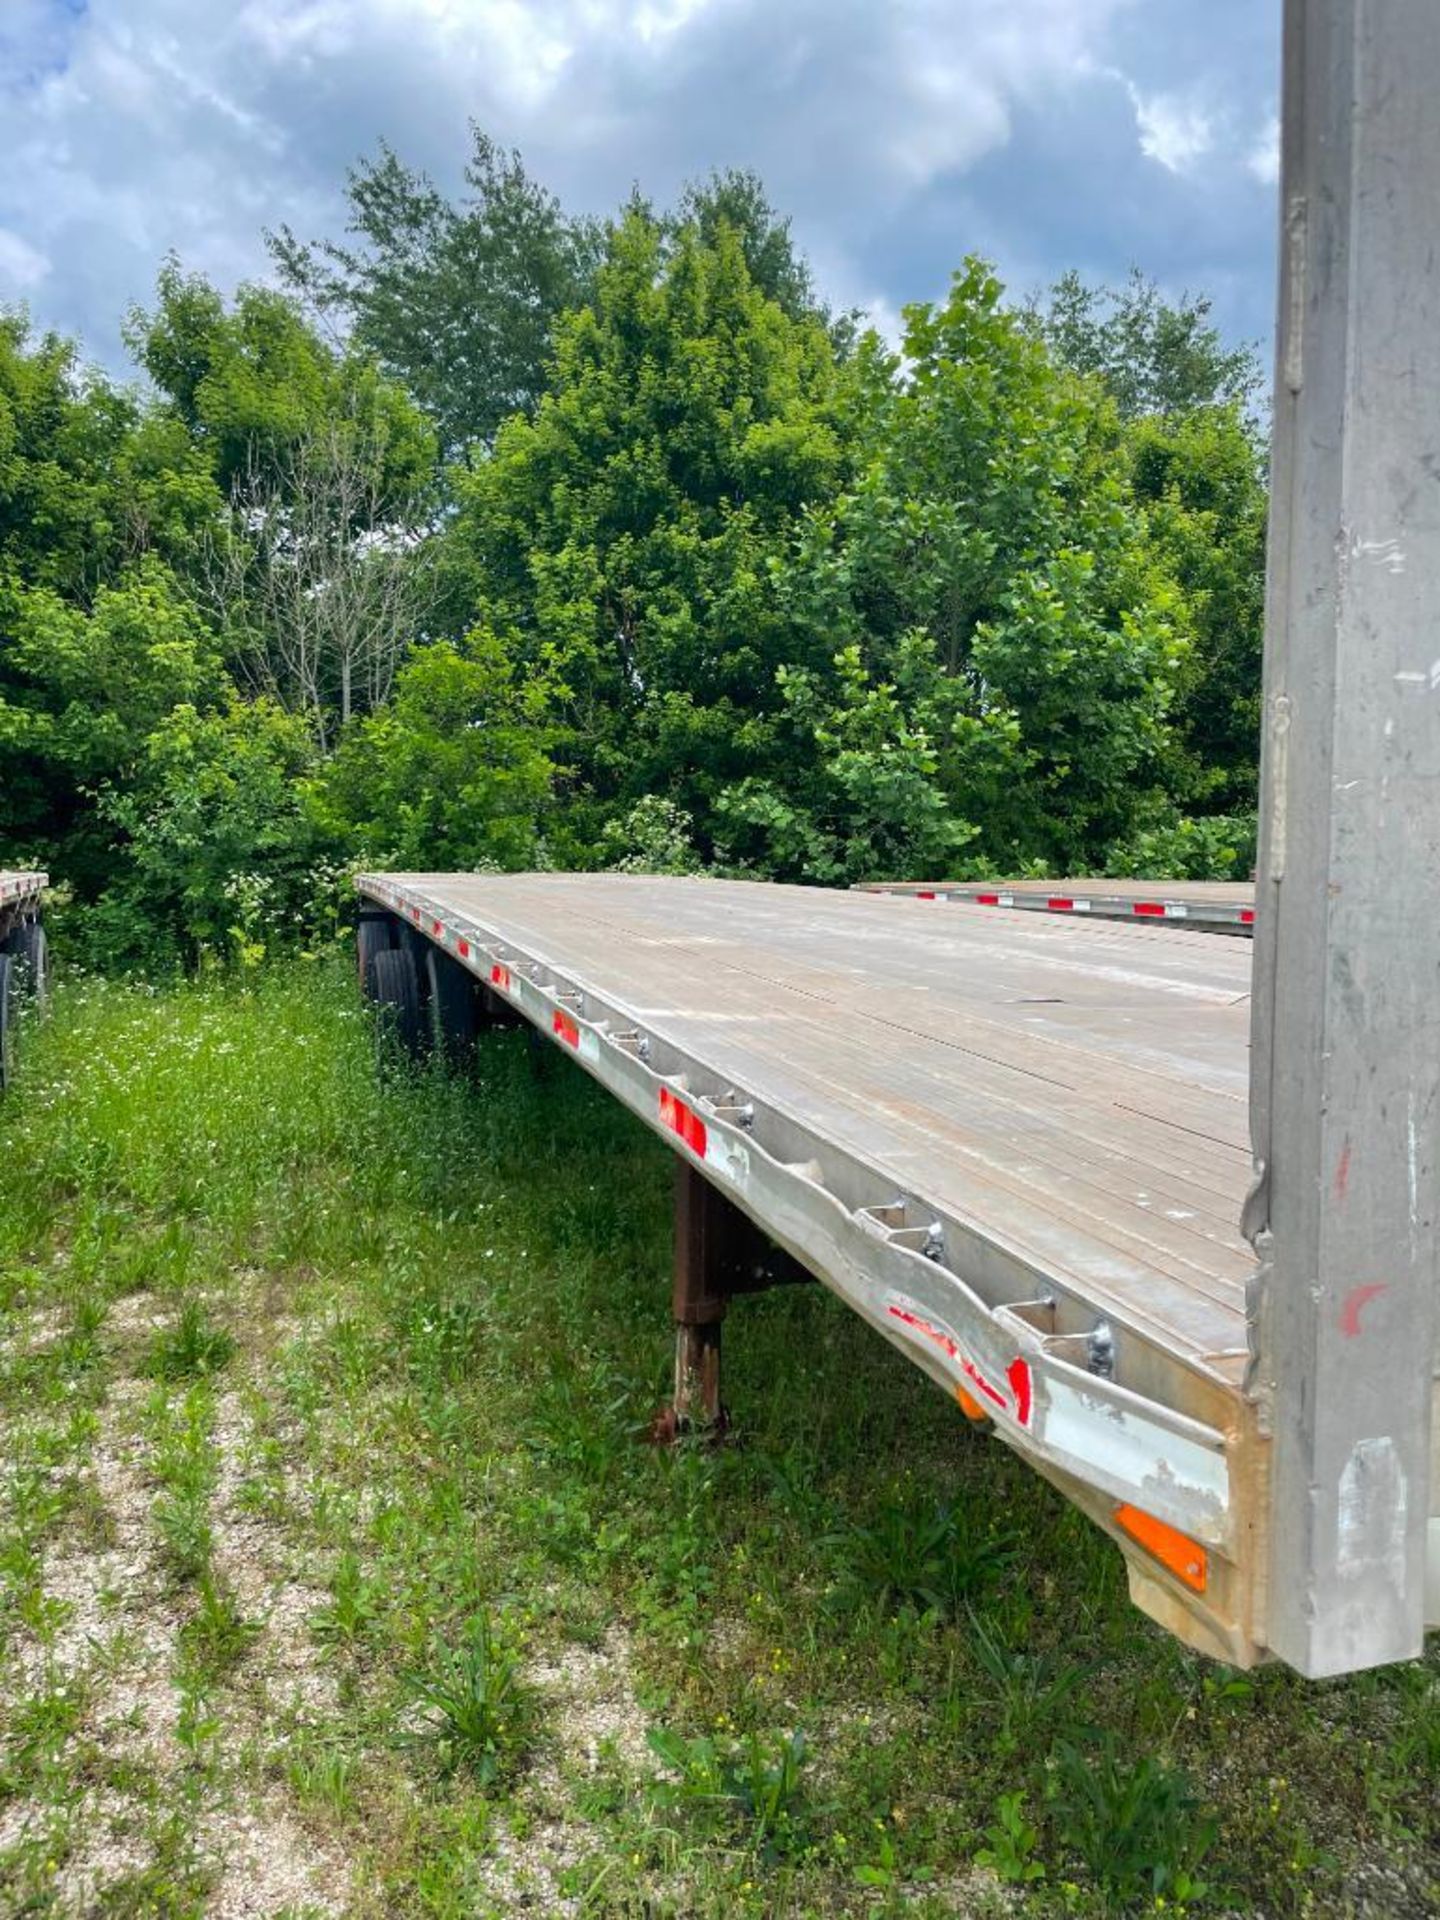 1983 RAVENS 42' ALUMINUM FLATBED TRAILER, DUAL TANDEM SPREAD AXLE, MODEL 54241, WITH HEADACHE - Image 2 of 3